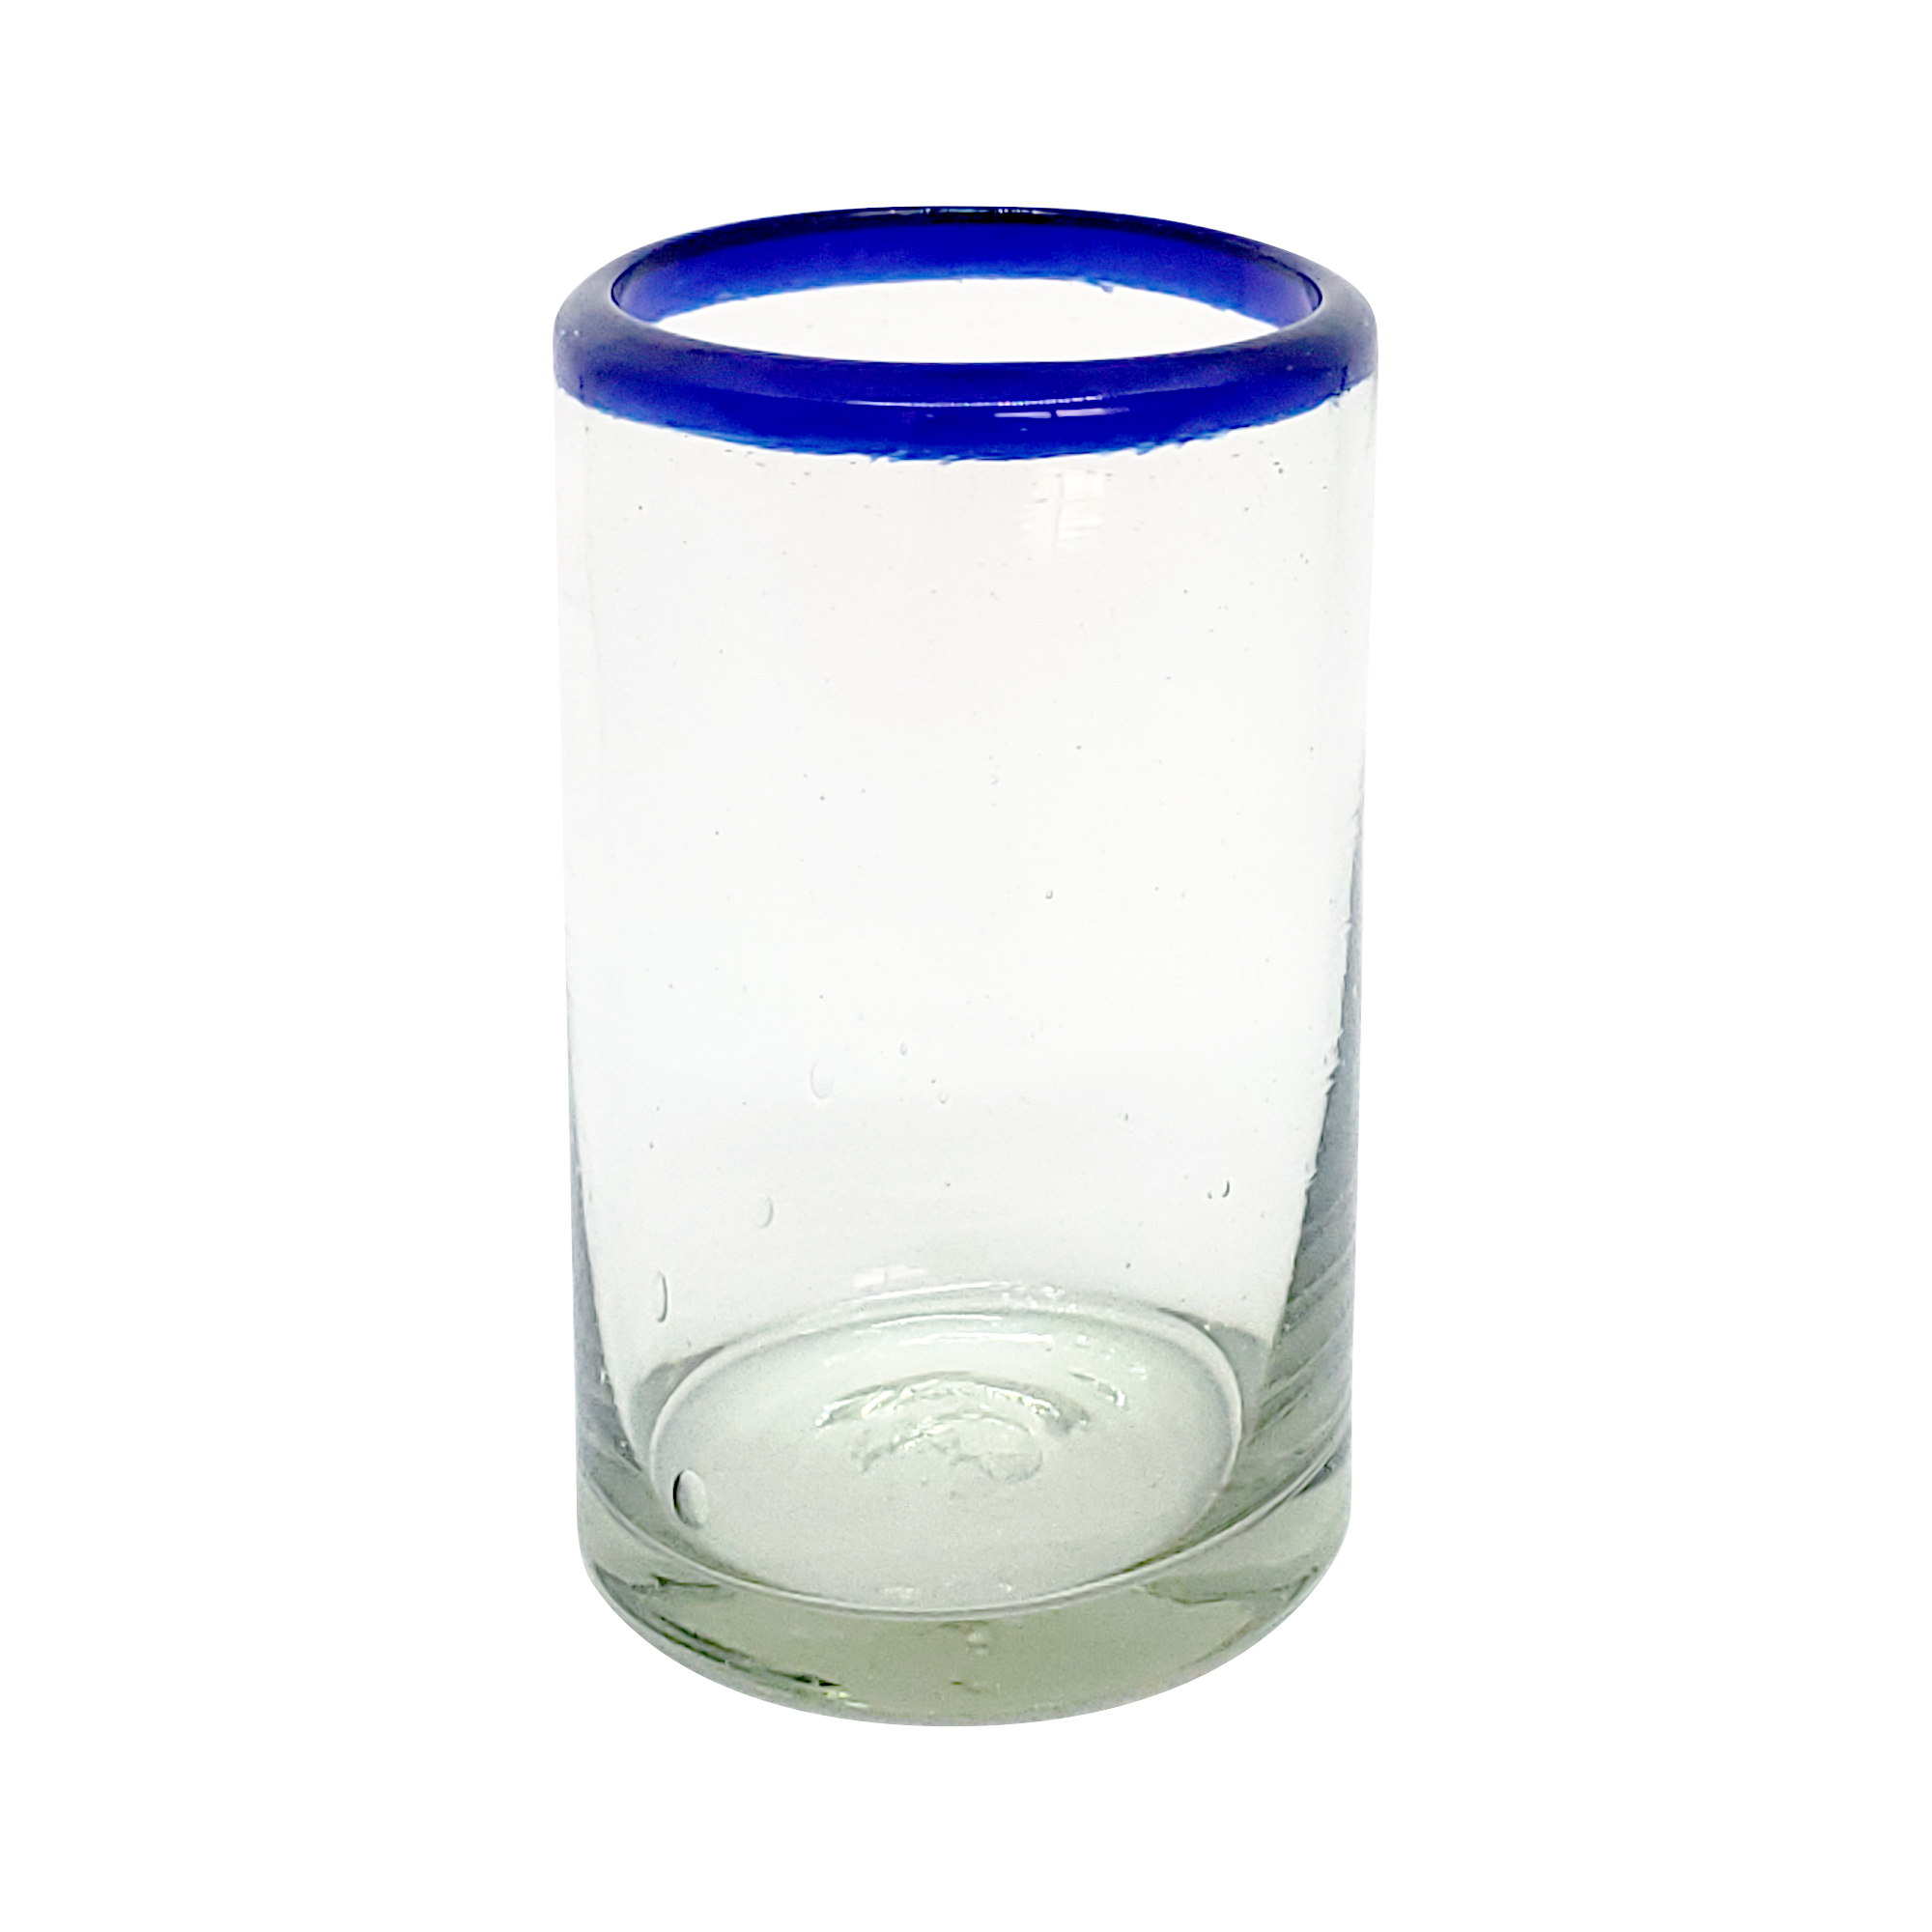 Colored Rim Glassware / Cobalt Blue Rim 9 oz Juice Glasses (set of 6) / For those who enjoy fresh squeezed fruit juice in the morning, these small glasses are just the right size. Made from authentic recycled glass.